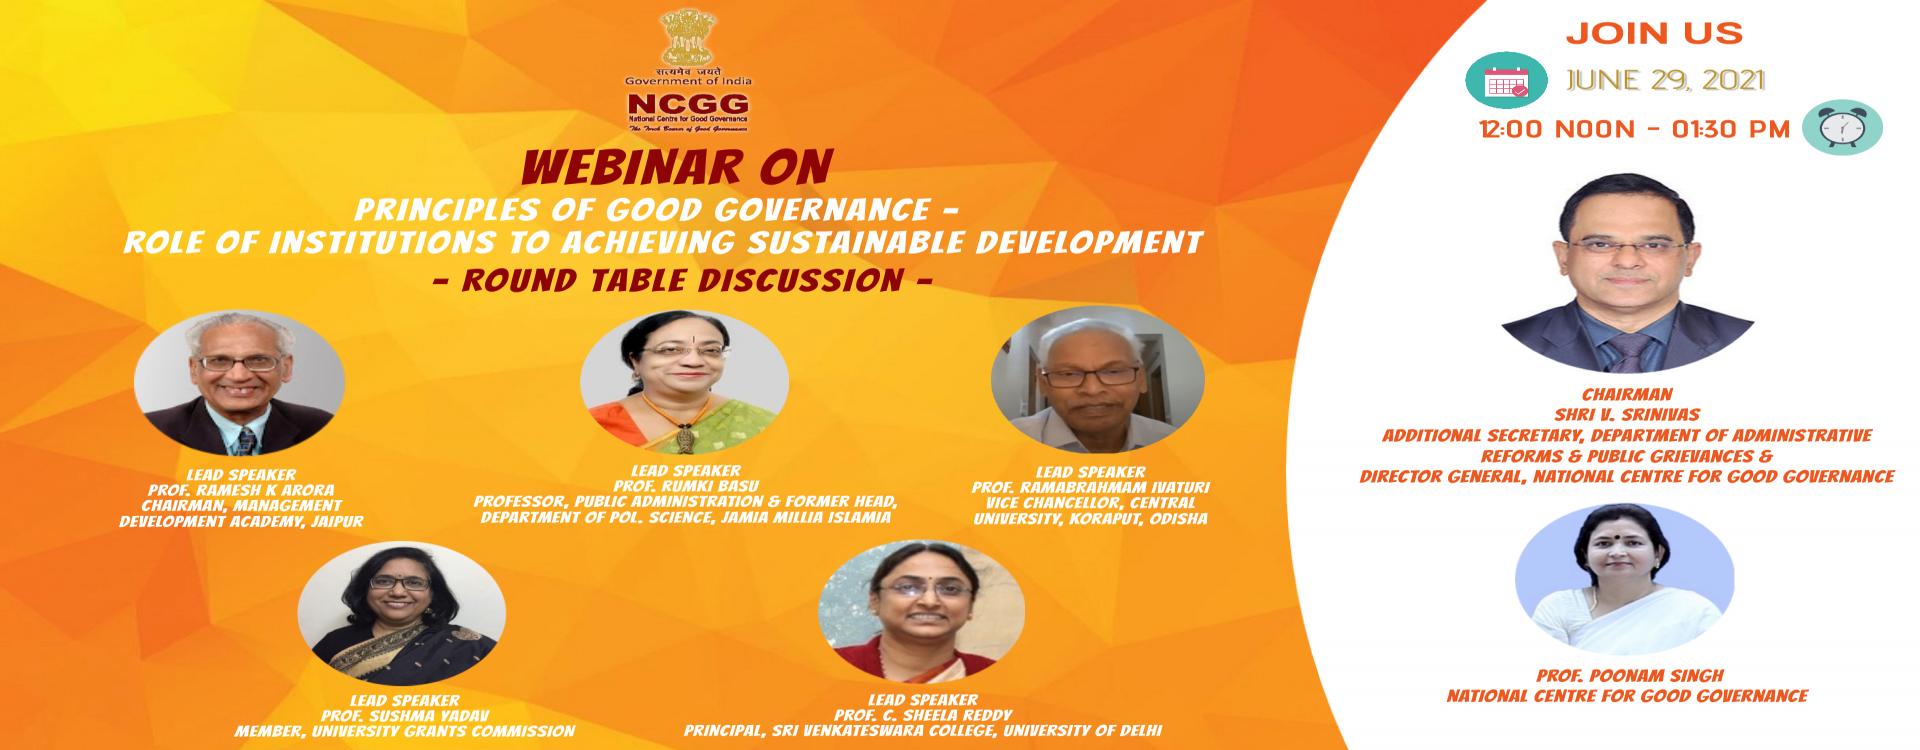 Webinar on &quot;Principles of Good Governance - Role of Institutions to Achieving Sustainable Development&quot;